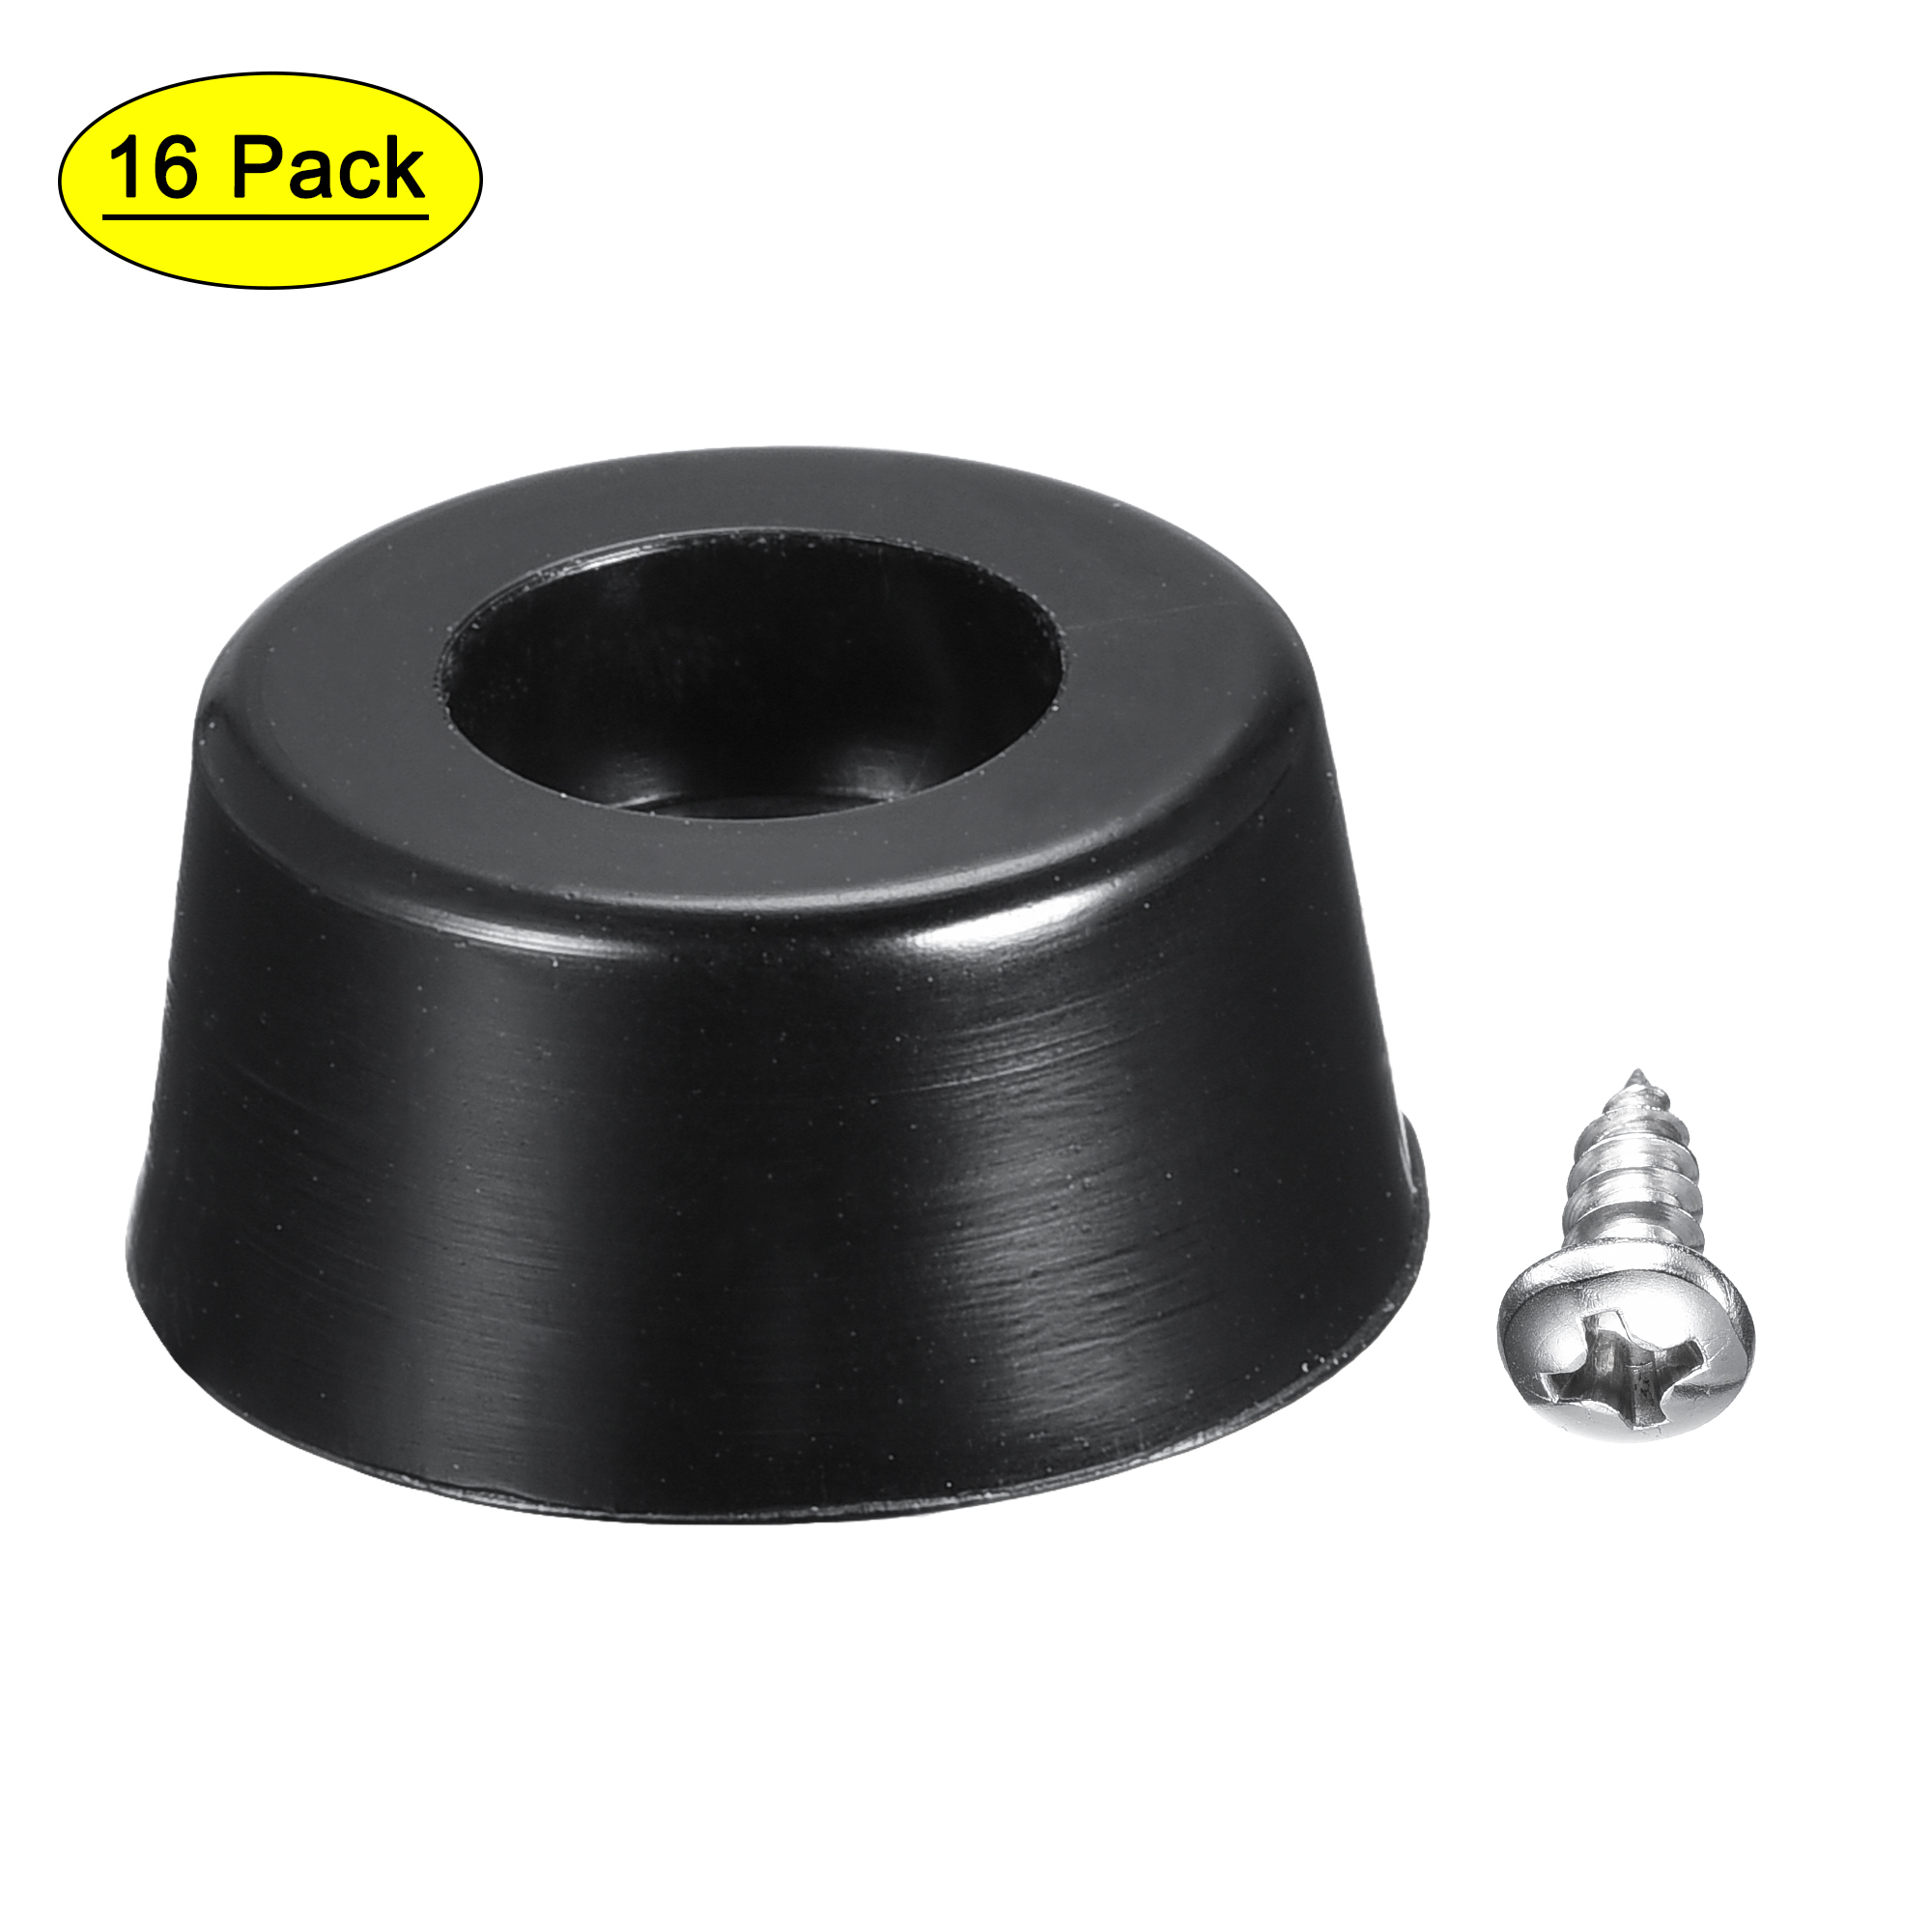 Uxcell 0.71" W x  0.31" H Rubber Bumper Feet, Stainless Steel Screws and Washer 16 Pack - image 1 of 5